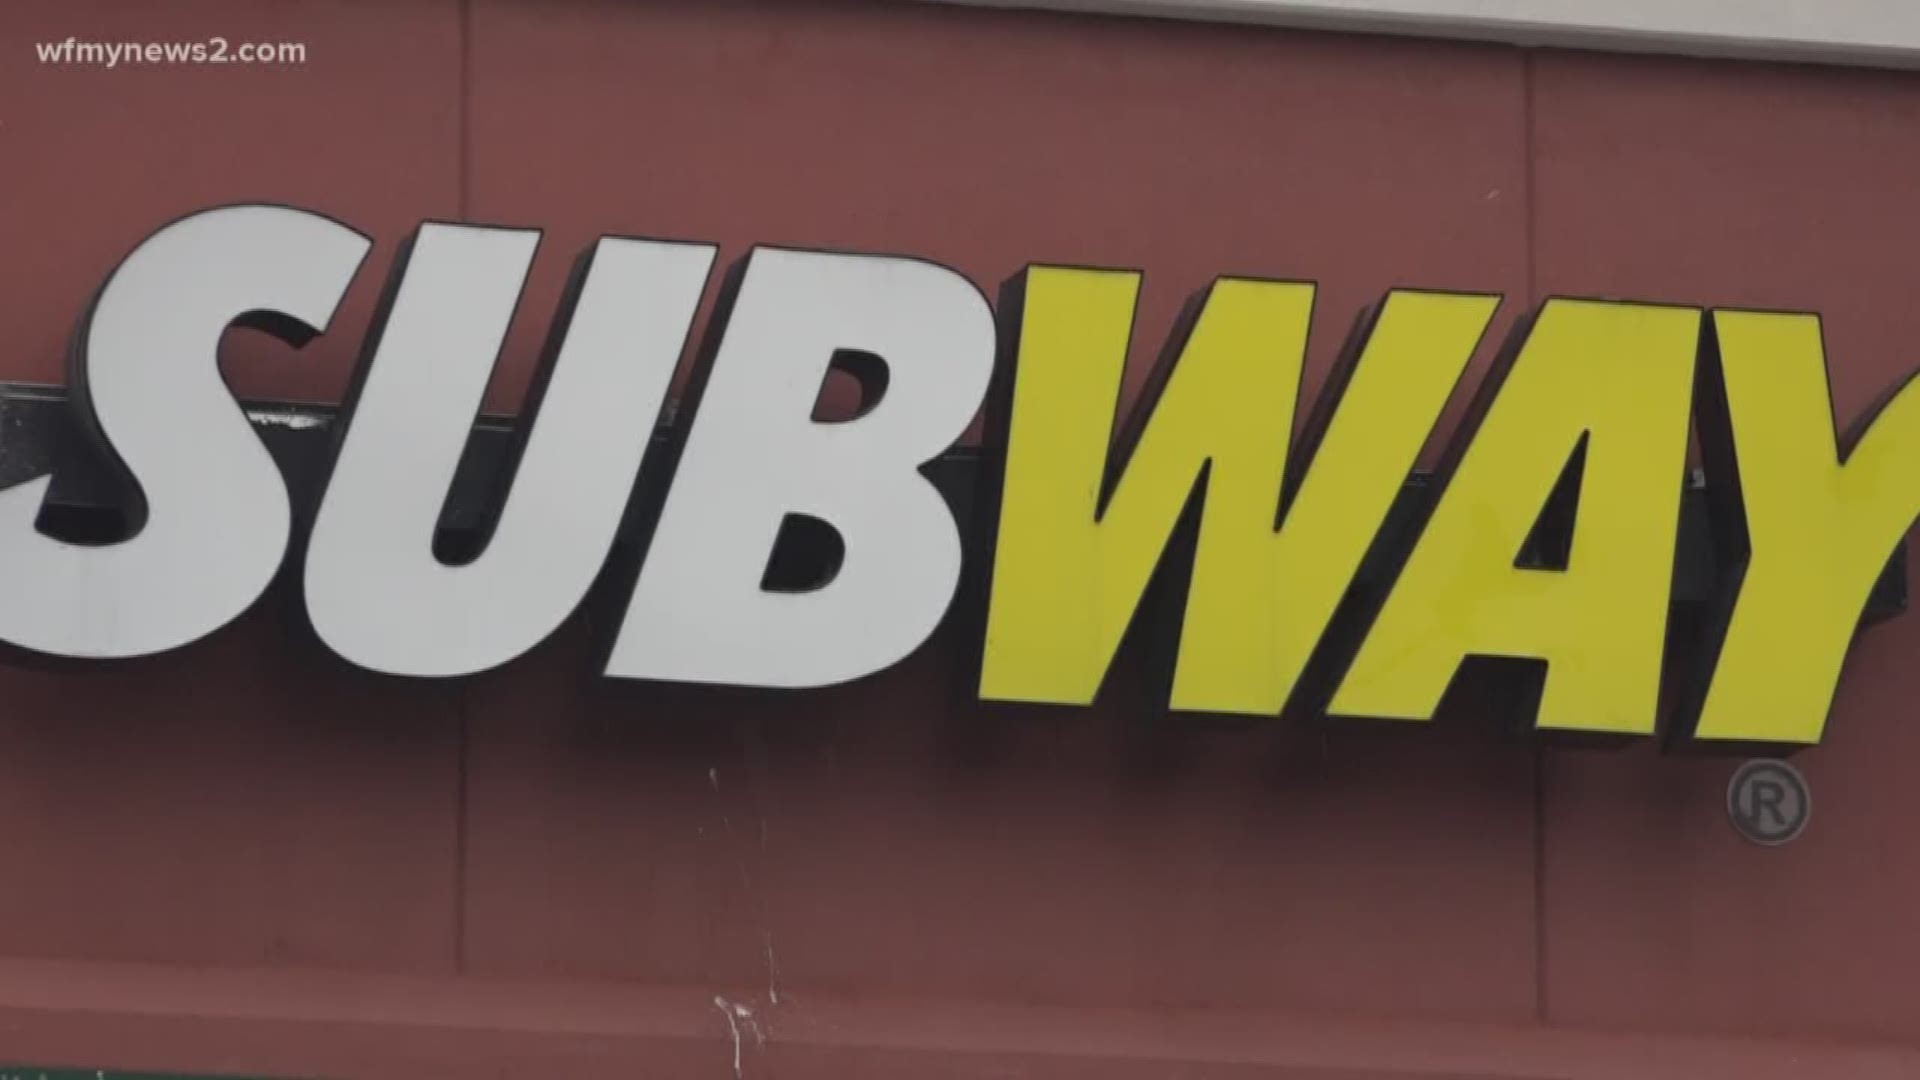 A family from Winston-Salem spent the weekend in Georgia celebrating their Grandmother's 81st birthday and stopped at the Subway on Newnan Crossing Blvd. in Newnan on their way back. Their stop for food was interrupted with a visit from police after an employee called 911.